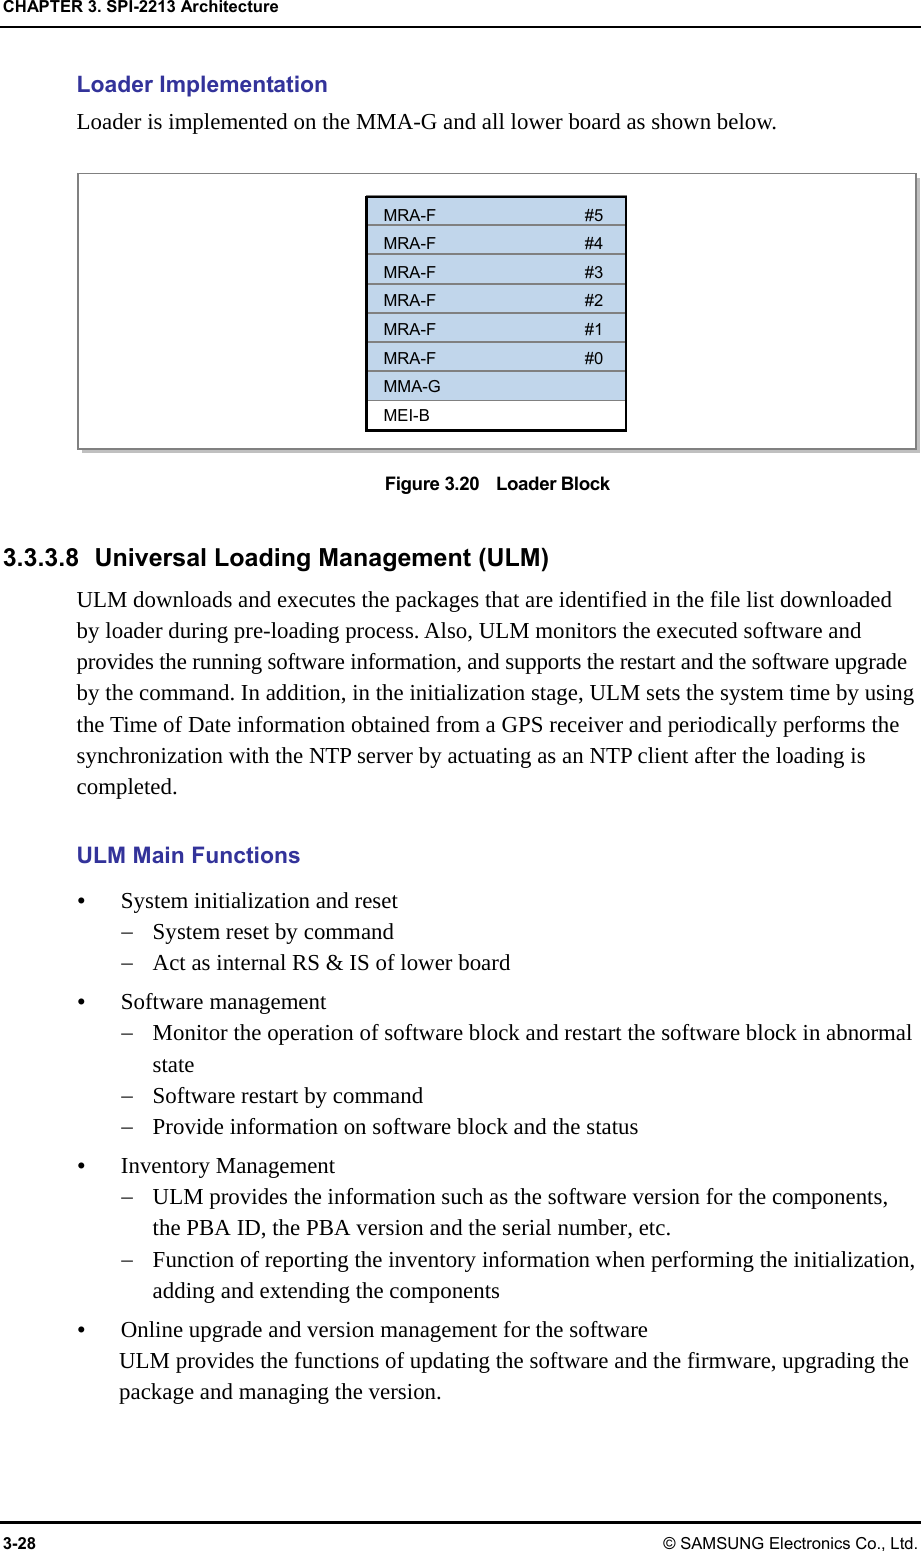 CHAPTER 3. SPI-2213 Architecture 3-28 © SAMSUNG Electronics Co., Ltd. Loader Implementation Loader is implemented on the MMA-G and all lower board as shown below.  Figure 3.20    Loader Block  3.3.3.8  Universal Loading Management (ULM) ULM downloads and executes the packages that are identified in the file list downloaded by loader during pre-loading process. Also, ULM monitors the executed software and provides the running software information, and supports the restart and the software upgrade by the command. In addition, in the initialization stage, ULM sets the system time by using the Time of Date information obtained from a GPS receiver and periodically performs the synchronization with the NTP server by actuating as an NTP client after the loading is completed.  ULM Main Functions y System initialization and reset − System reset by command − Act as internal RS &amp; IS of lower board y Software management − Monitor the operation of software block and restart the software block in abnormal state − Software restart by command − Provide information on software block and the status y Inventory Management − ULM provides the information such as the software version for the components, the PBA ID, the PBA version and the serial number, etc. − Function of reporting the inventory information when performing the initialization, adding and extending the components y Online upgrade and version management for the software ULM provides the functions of updating the software and the firmware, upgrading the package and managing the version. MRA-F #5 MRA-F #4 MRA-F #3 MRA-F #2 MRA-F #1 MRA-F #0 MMA-G MEI-B 